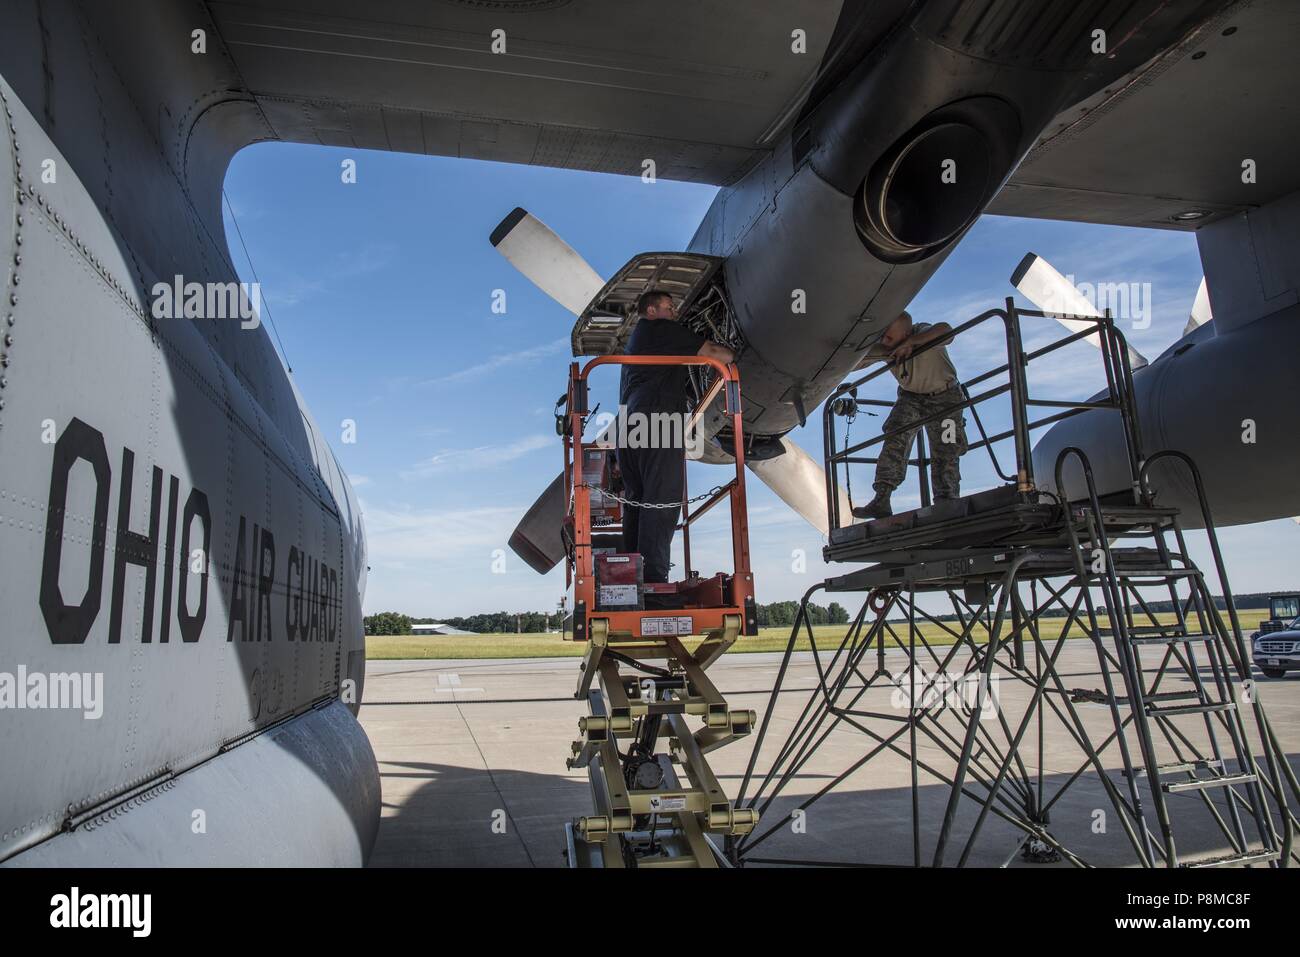 Senior Airman Tim Johnson and Senior Airman Hunter Mitchell, Aerospace Propulsion Specialist, 179th Airlift Wing Maintenance Group, evaluates an engine of the C-130H Hercules while it is running June 26, 2018, at the 179th Airlift Wing, Mansfield, Ohio, June 26, 2018. The diagnostic test requires the engine to be running for the Airman to properly identify the cause of this particular issue and is also known by aircraft mechanics as 'Man on the stand'. (U.S. Air National Guard photo by Capt. Paul Stennett/Released). () Stock Photo